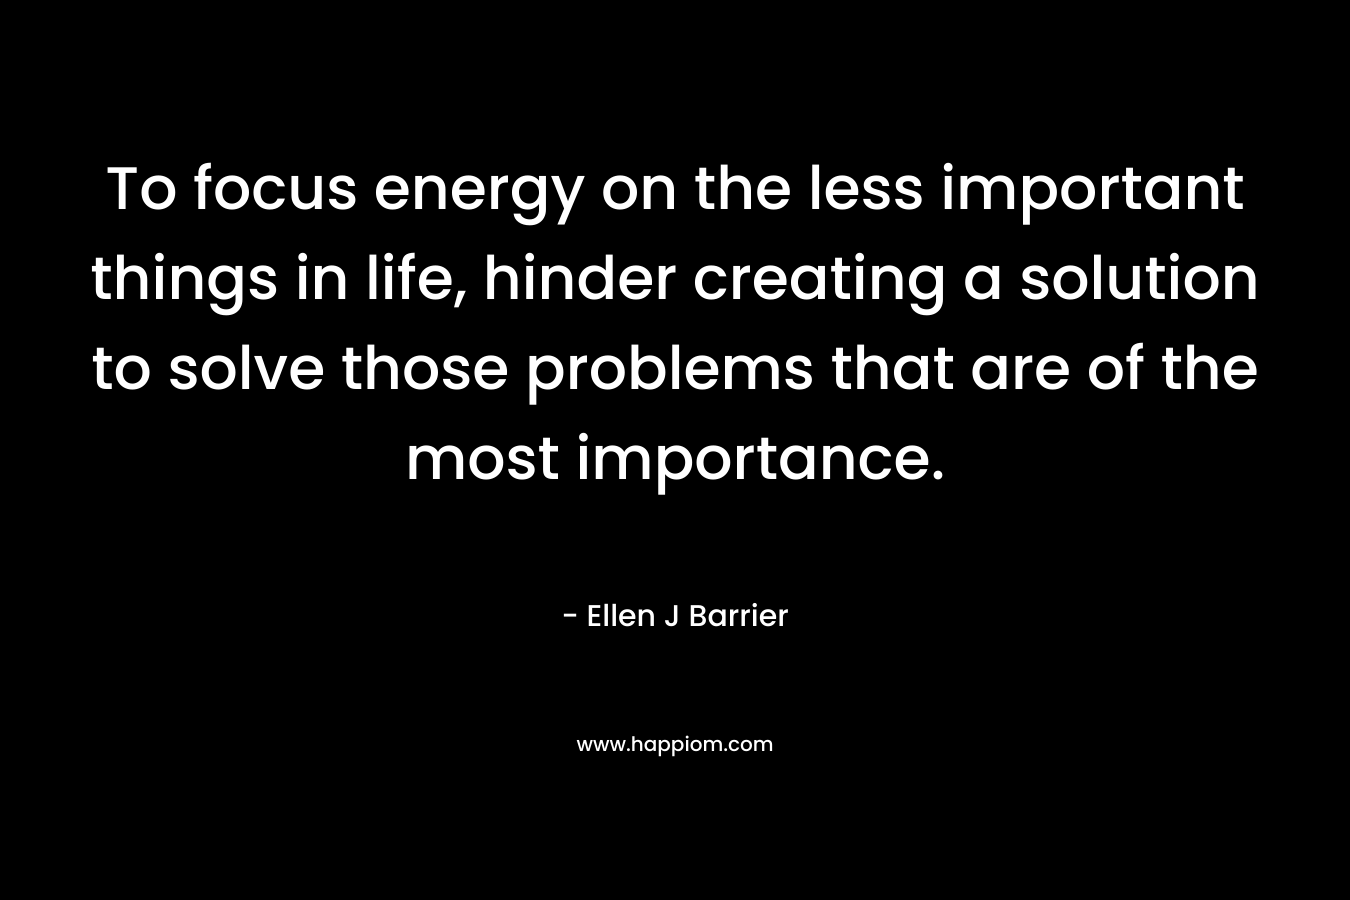 To focus energy on the less important things in life, hinder creating a solution to solve those problems that are of the most importance. – Ellen J Barrier